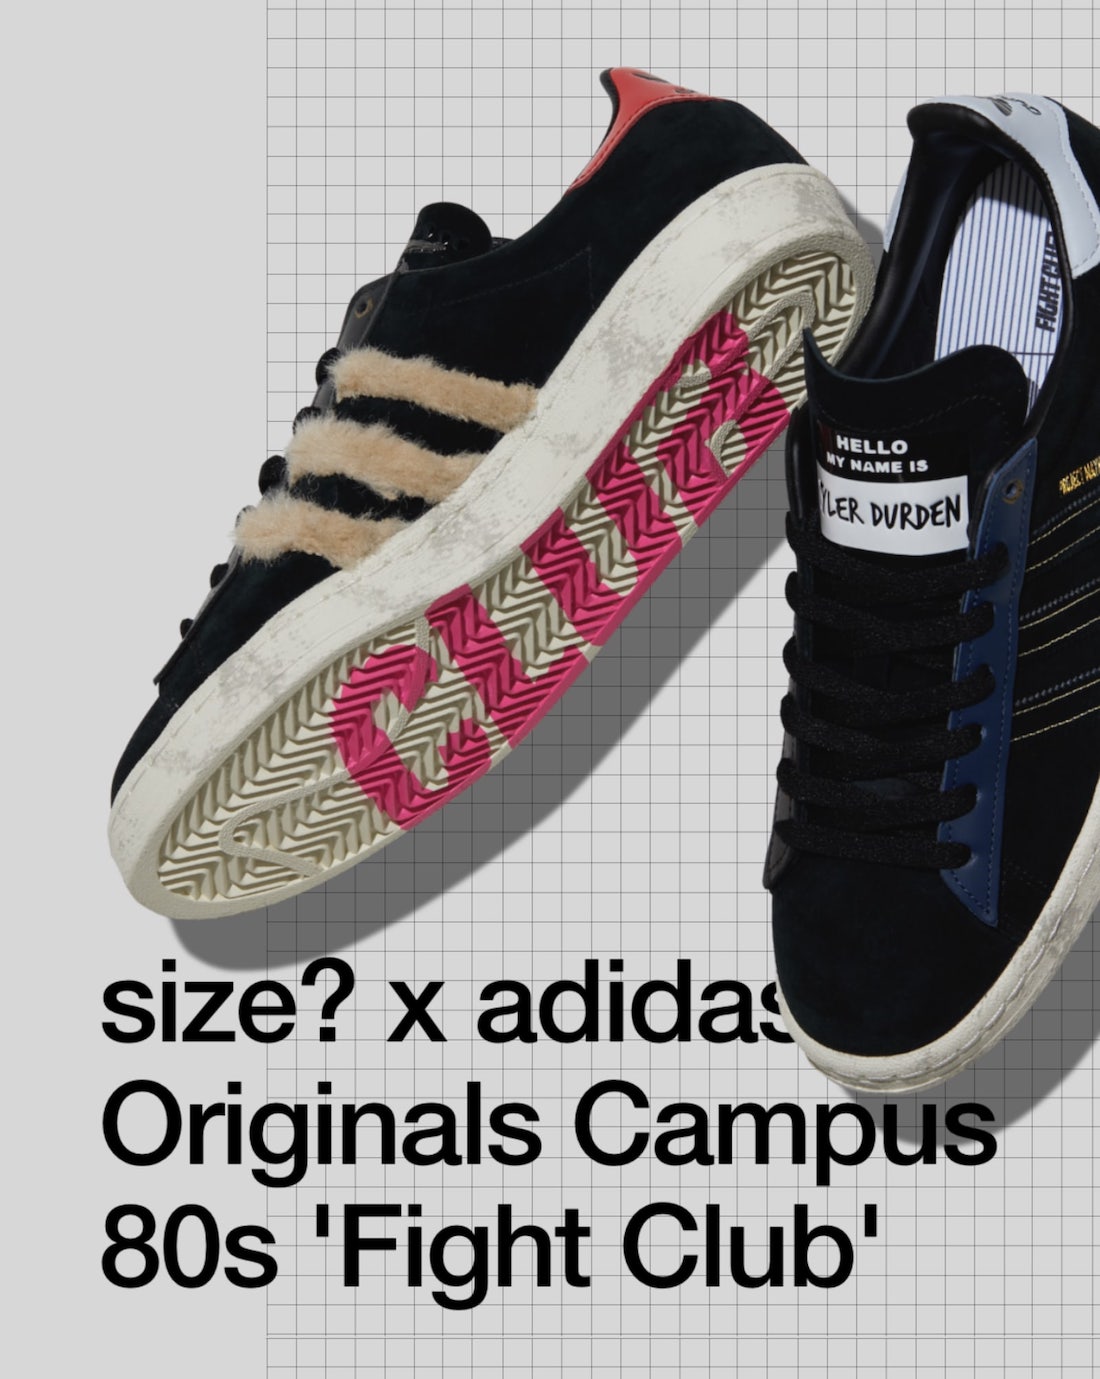 places that sell adidas shoes